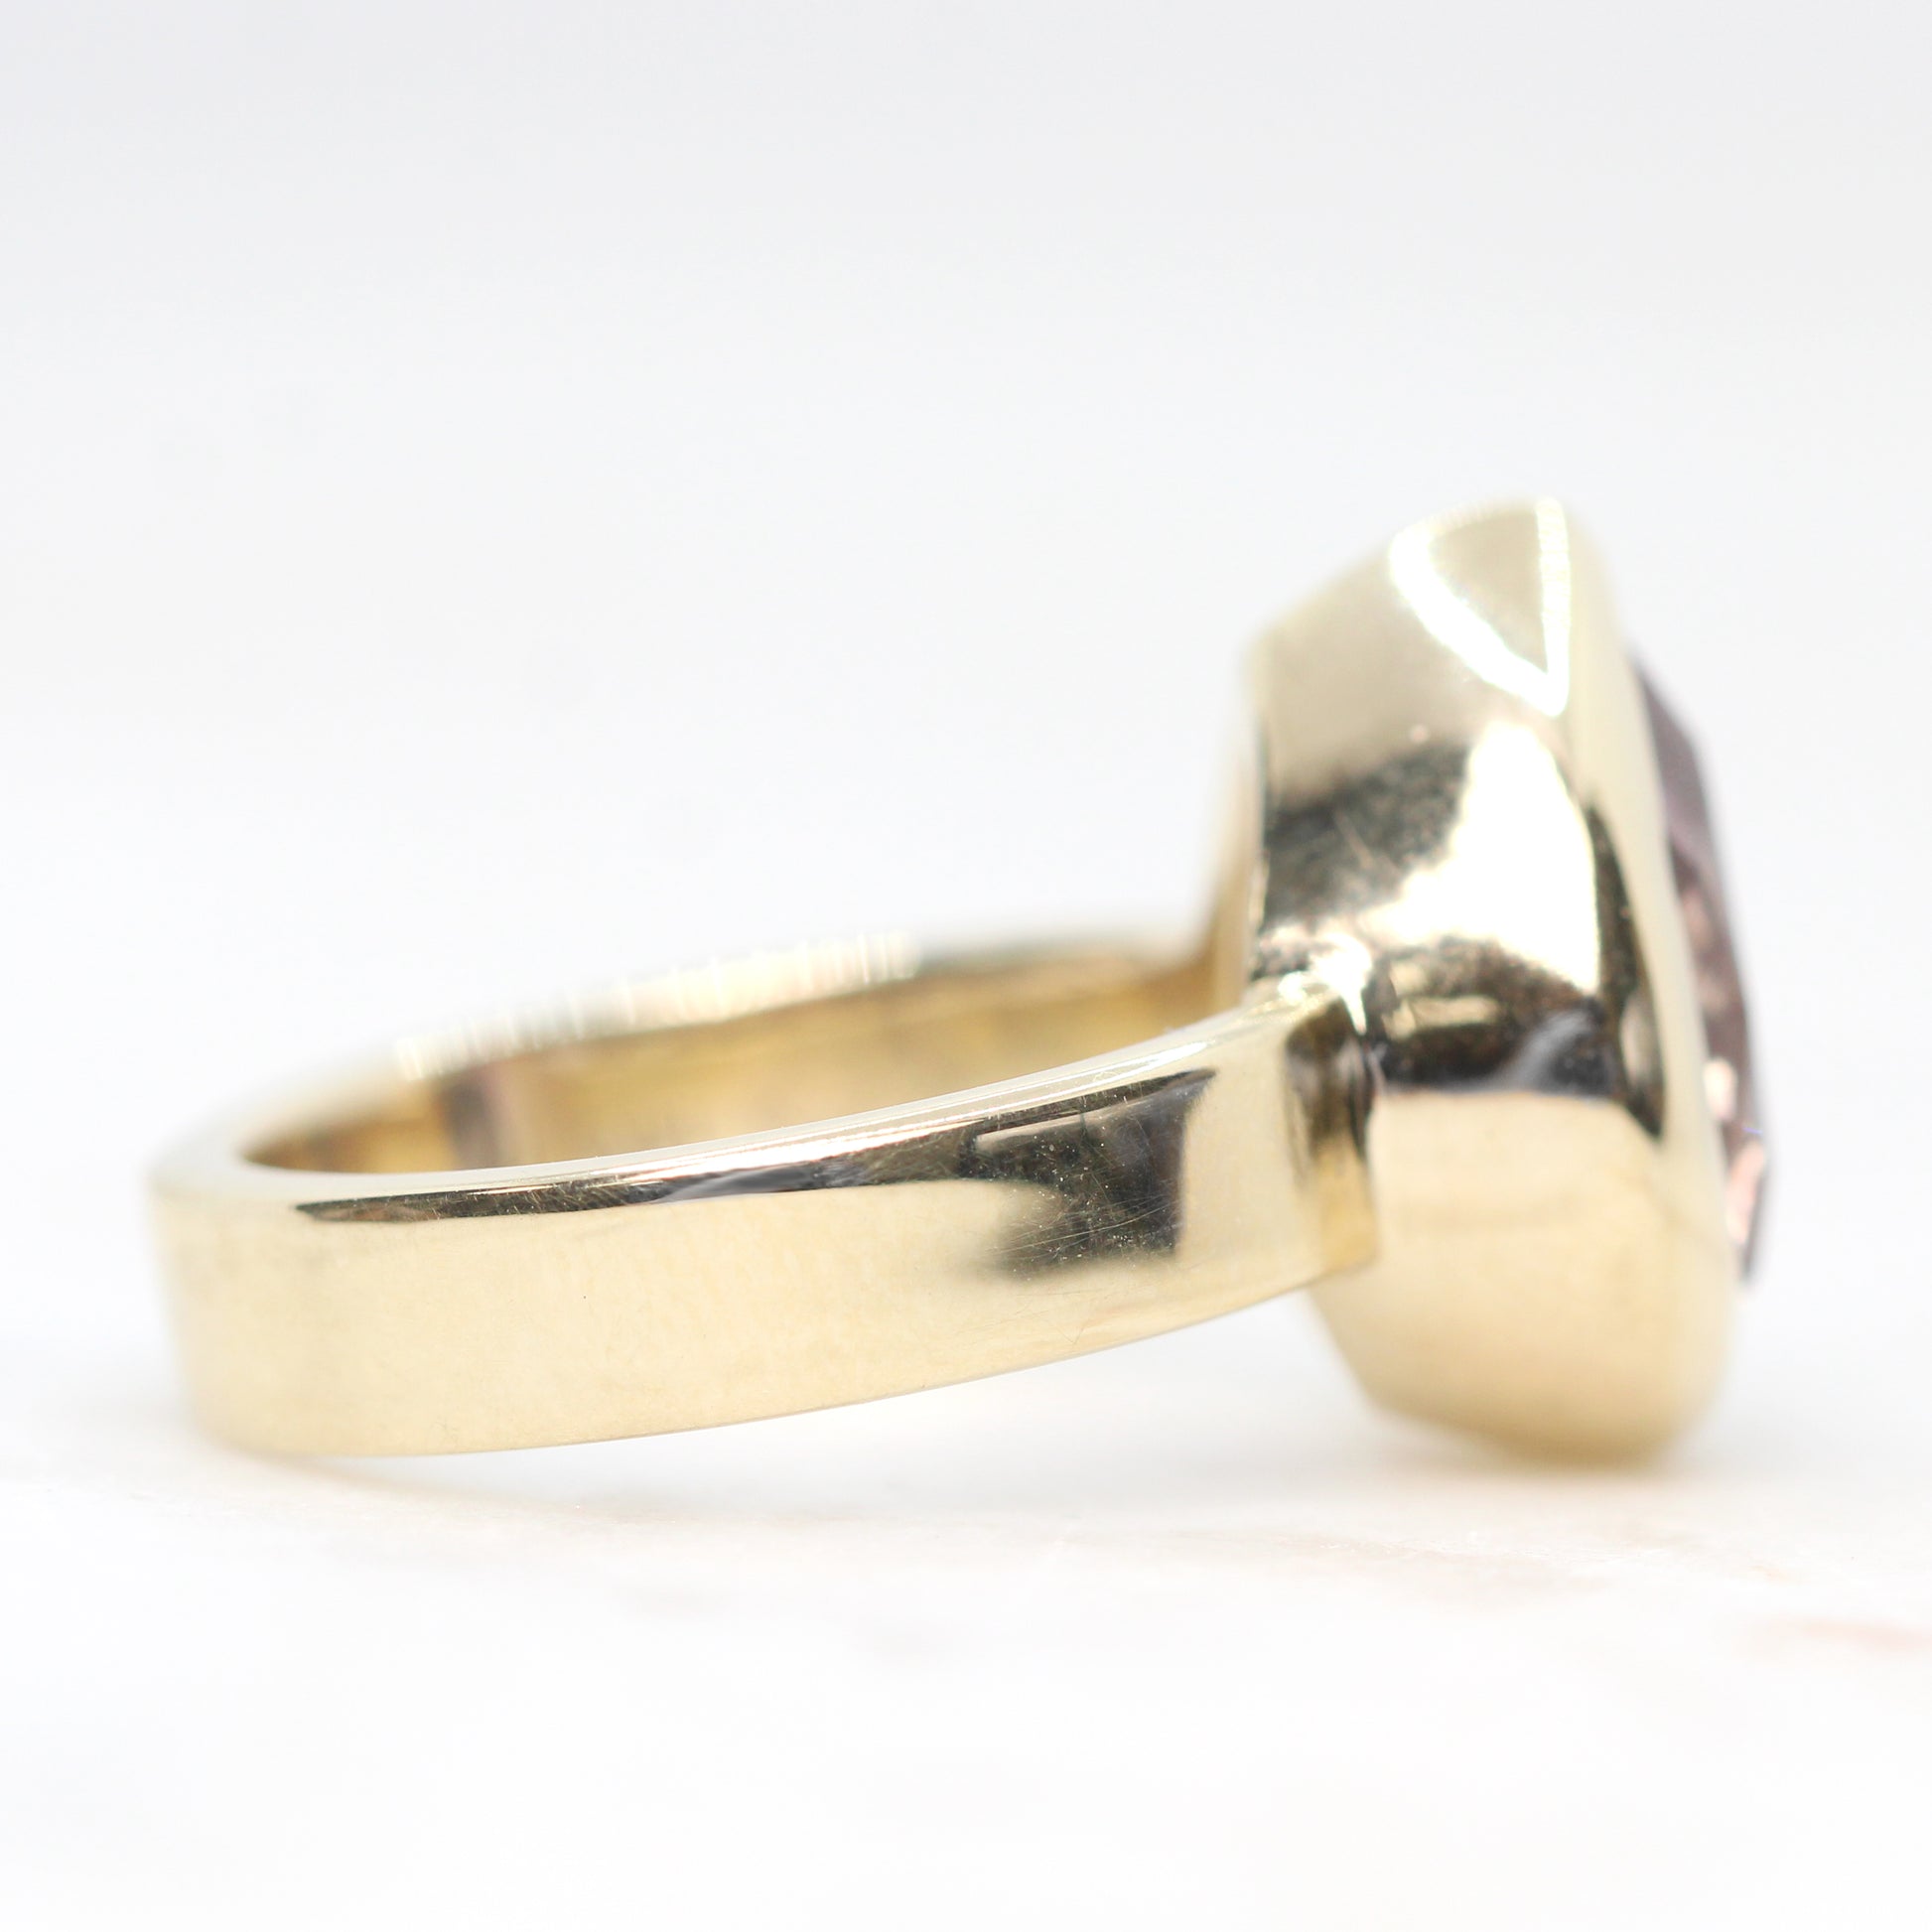 Carter Ring with a 4.29 Carat Pear Melody Quartz in 14k Yellow Gold - Ready to Size and Ship - Midwinter Co. Alternative Bridal Rings and Modern Fine Jewelry